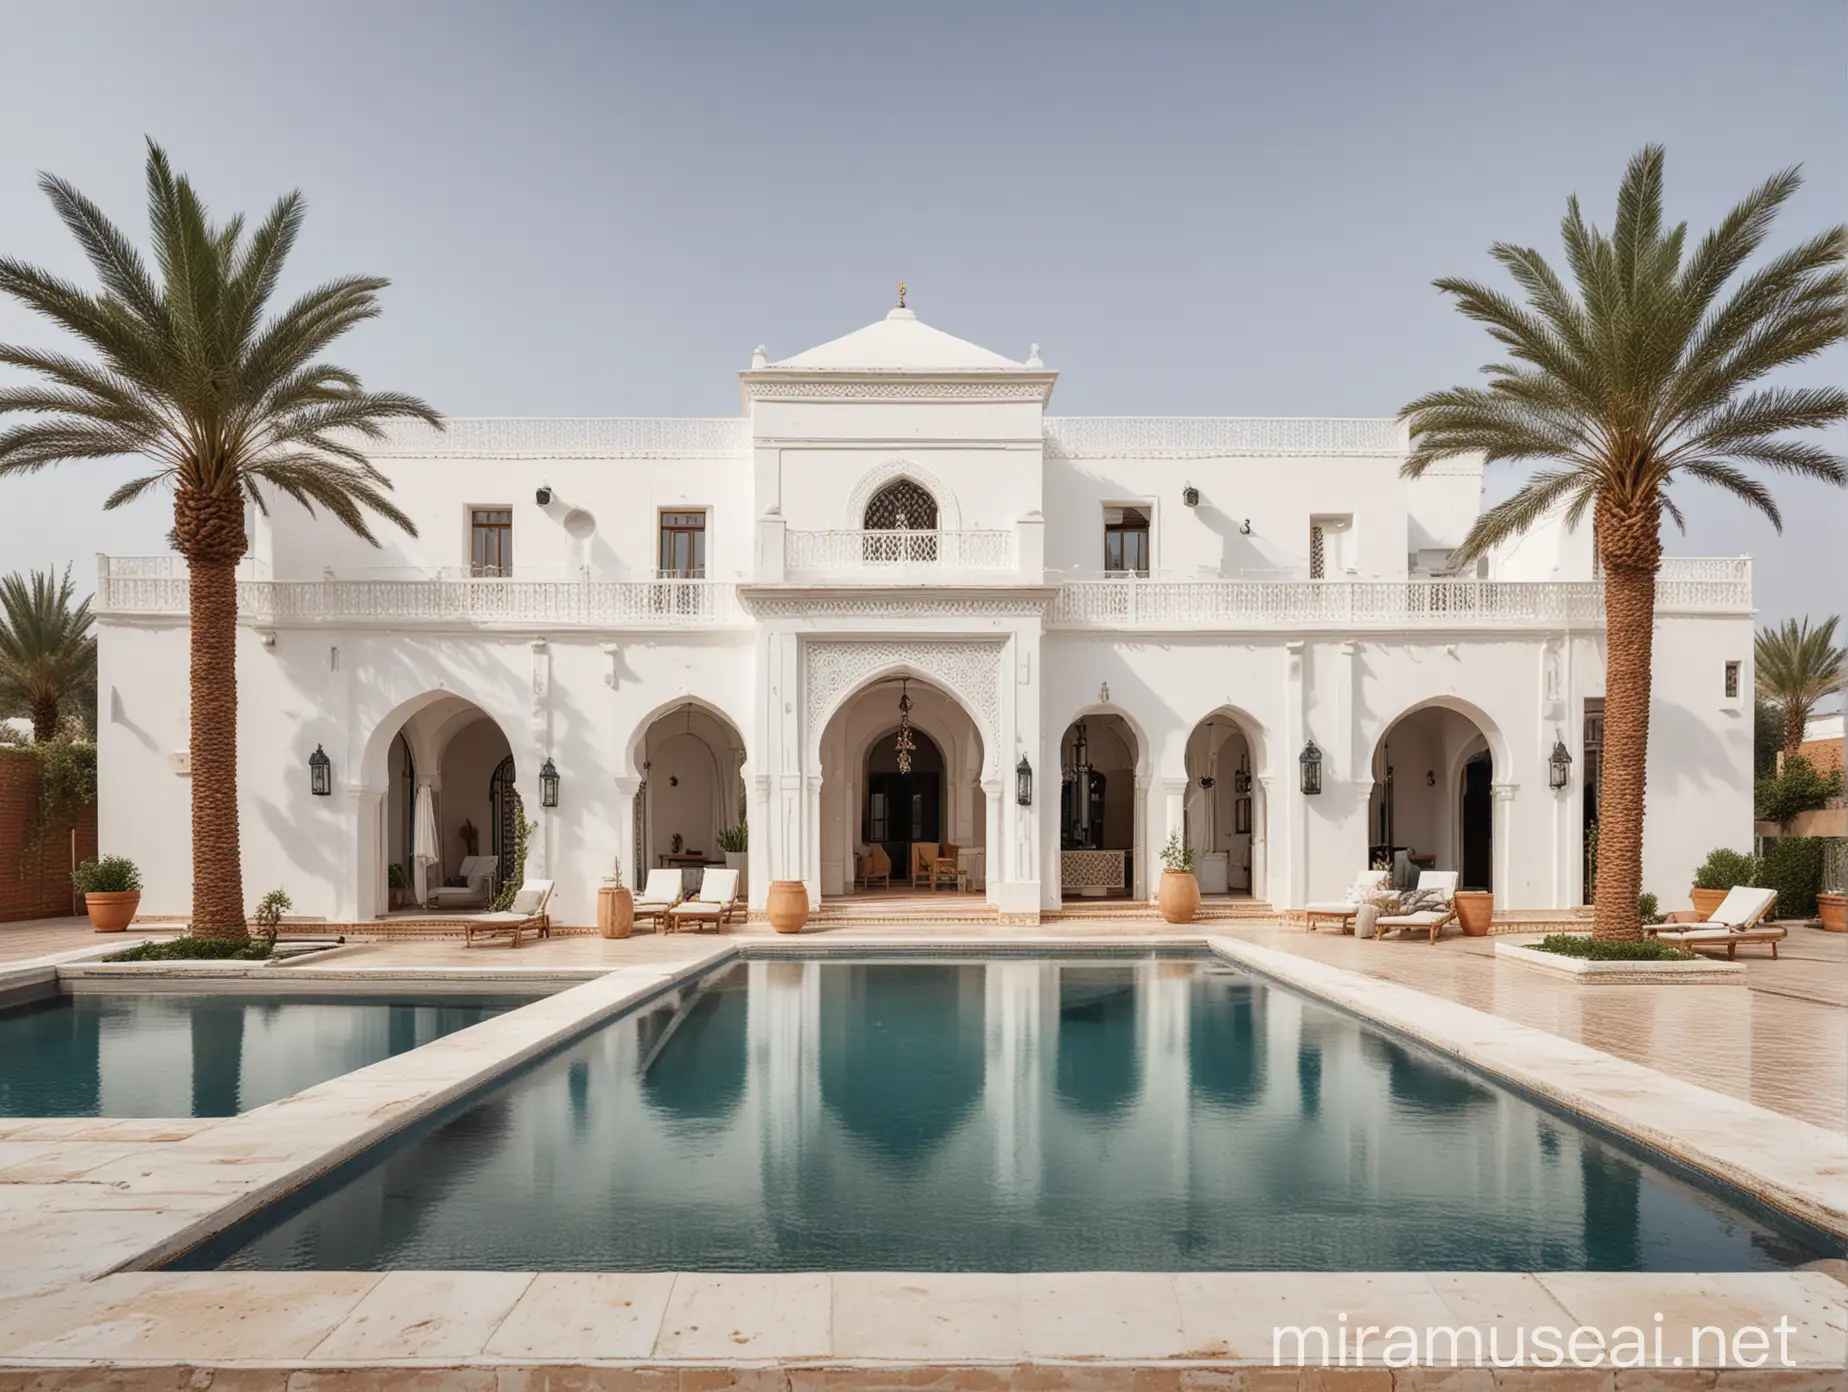 Luxurious Moroccan Villa with Spacious Pool and Elegant Fountain